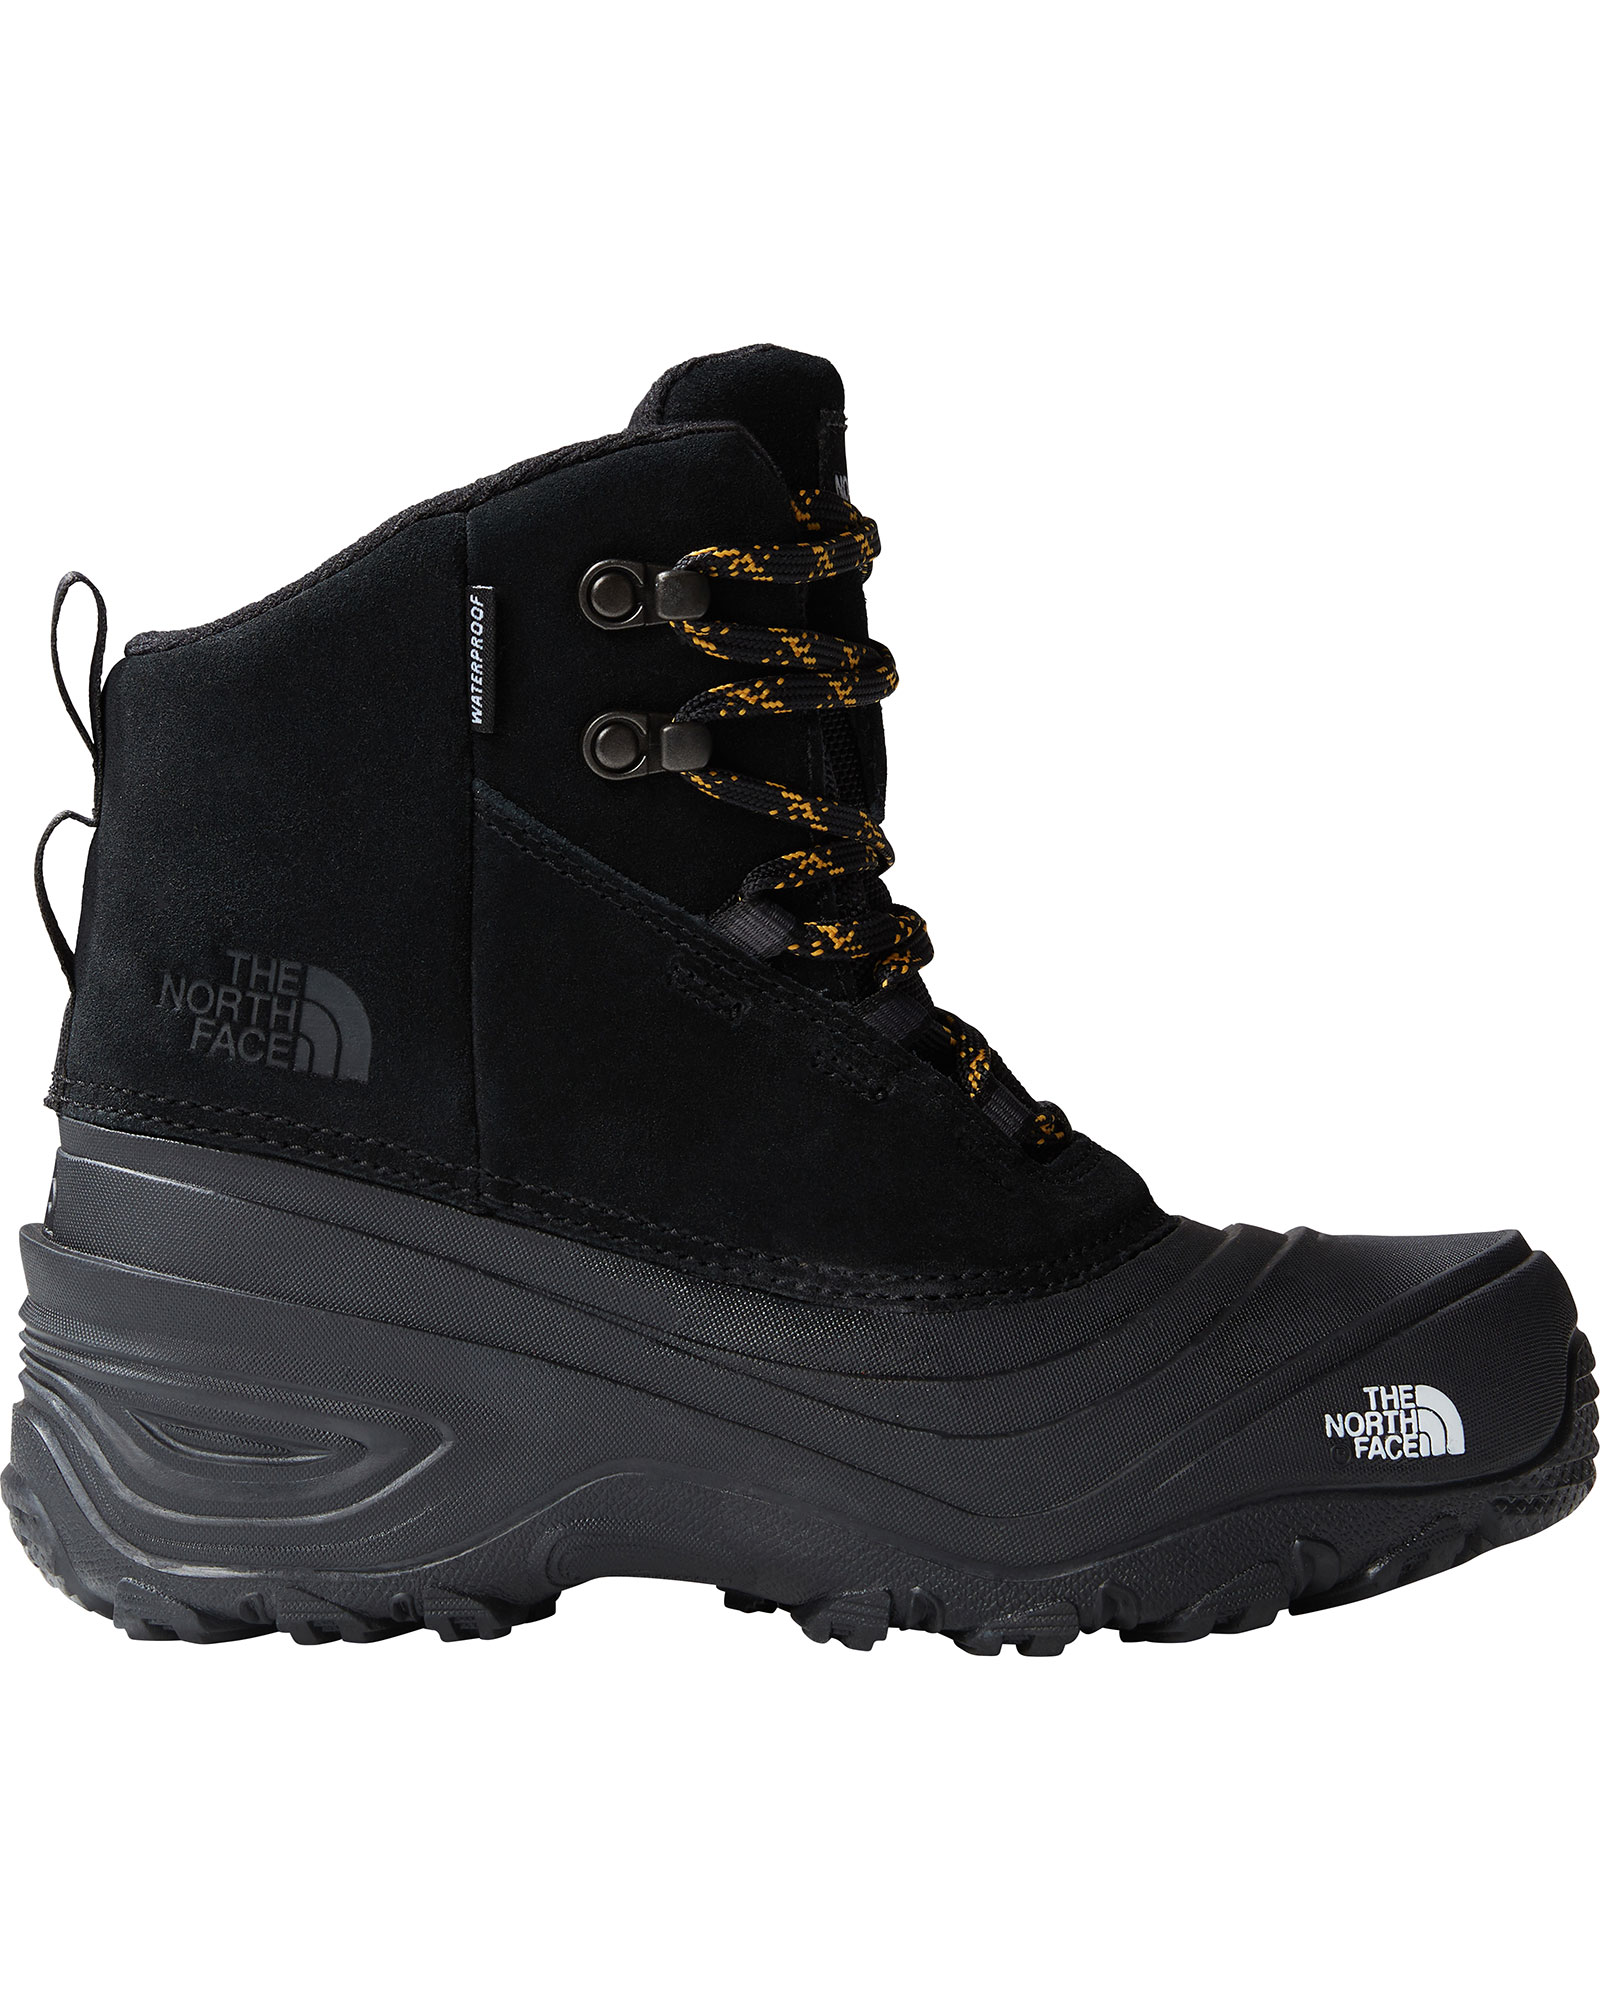 The North Face Youth Chilkat V Lace Waterproof Kid’s Boots - TNF Black/TNF Black UK 3